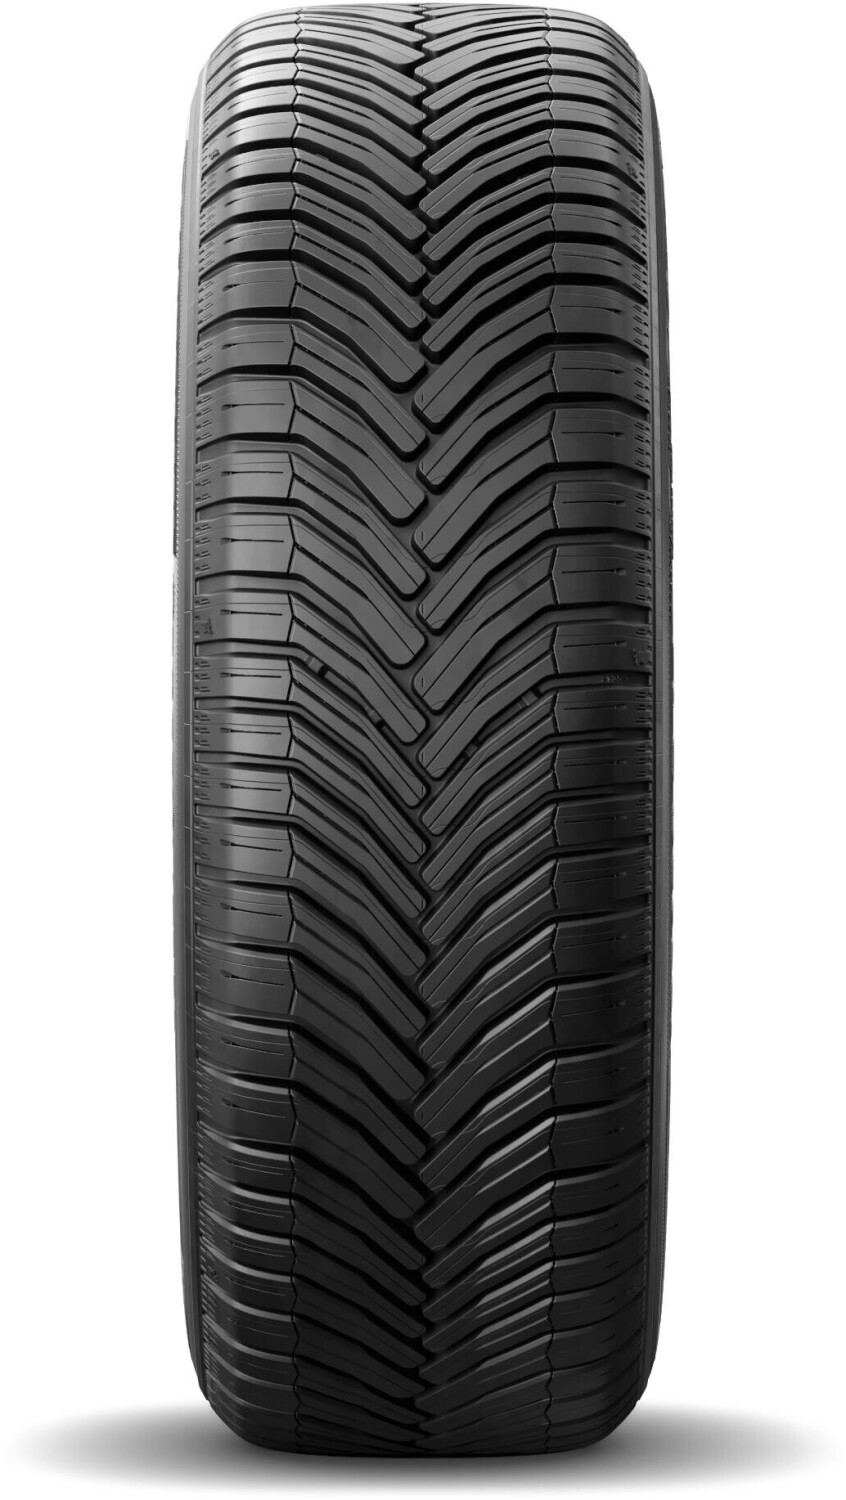 Buy Michelin CrossClimate+ 185/60 R14 86H XL from £82.79 (Today) – Best